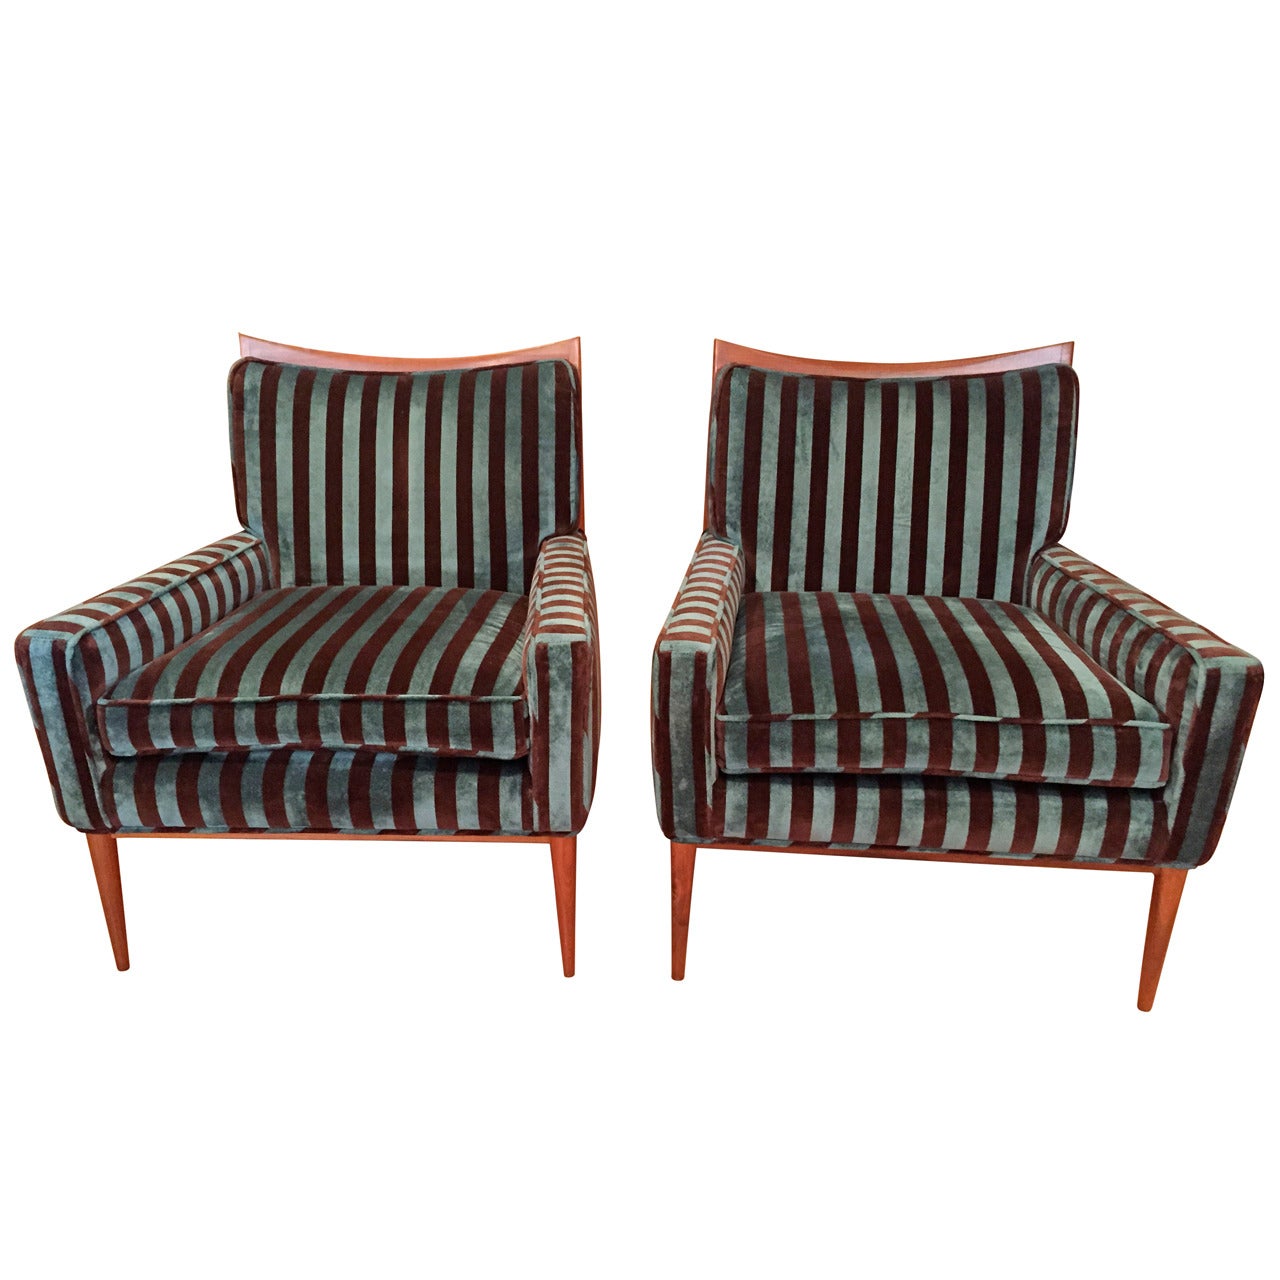 Pair of Paul McCobb for Directional Lounge Chairs in Original Fabric